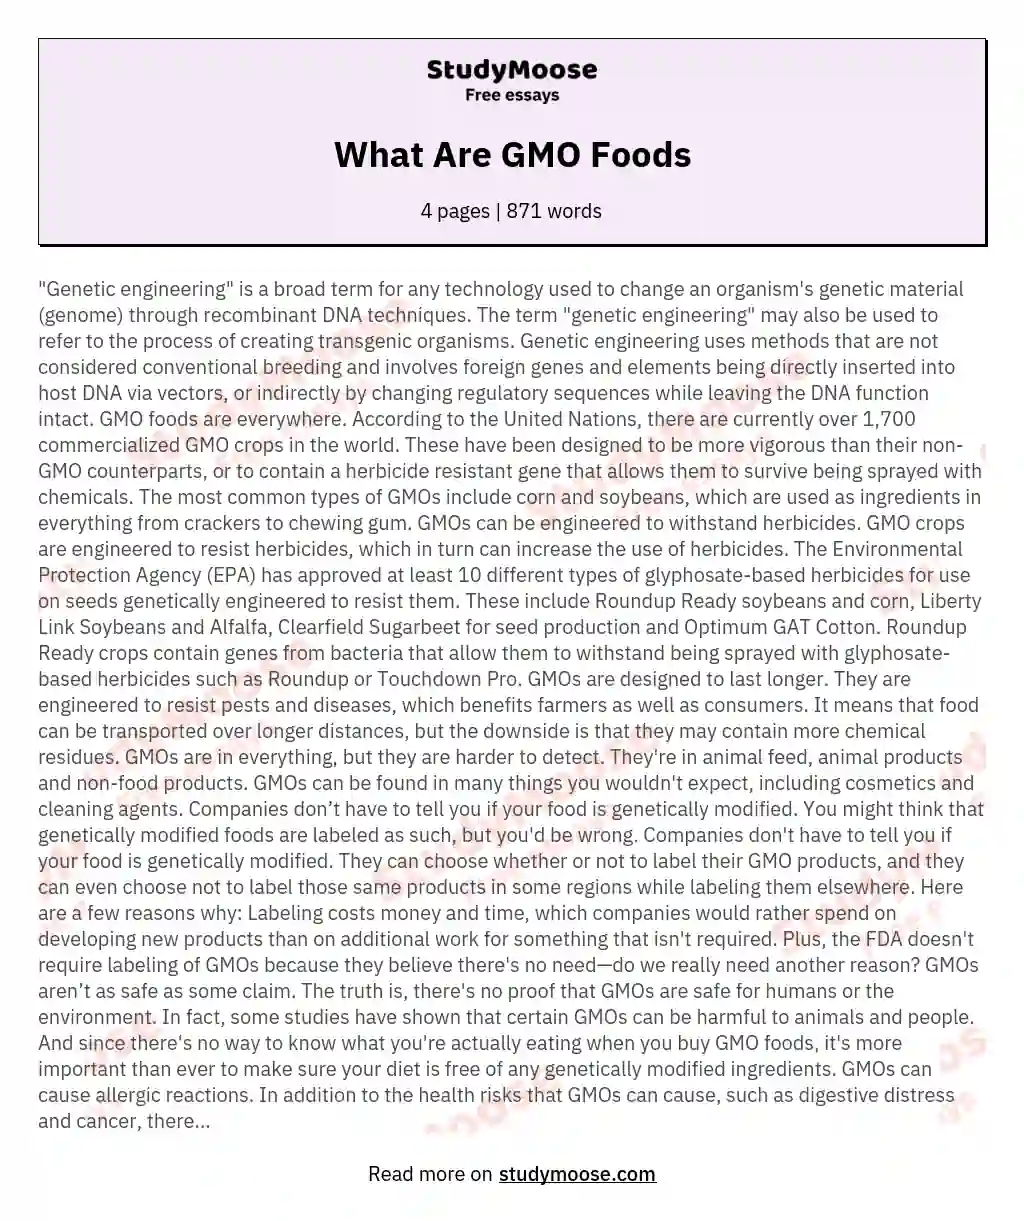 What Are GMO Foods essay